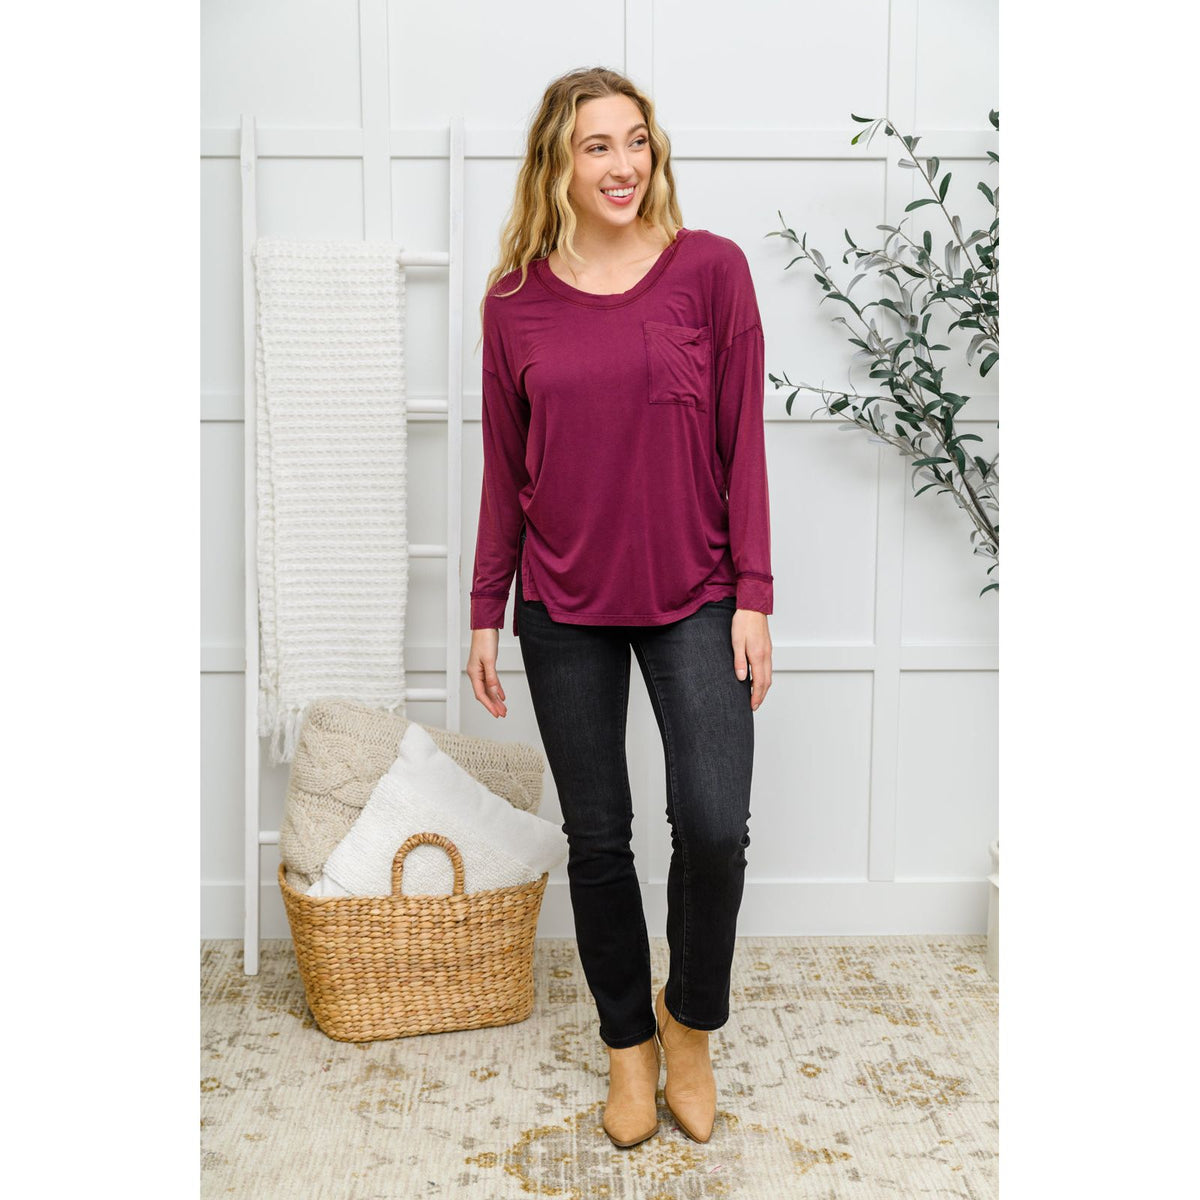 Long Sleeve Knit Top With Pocket In Burgundy